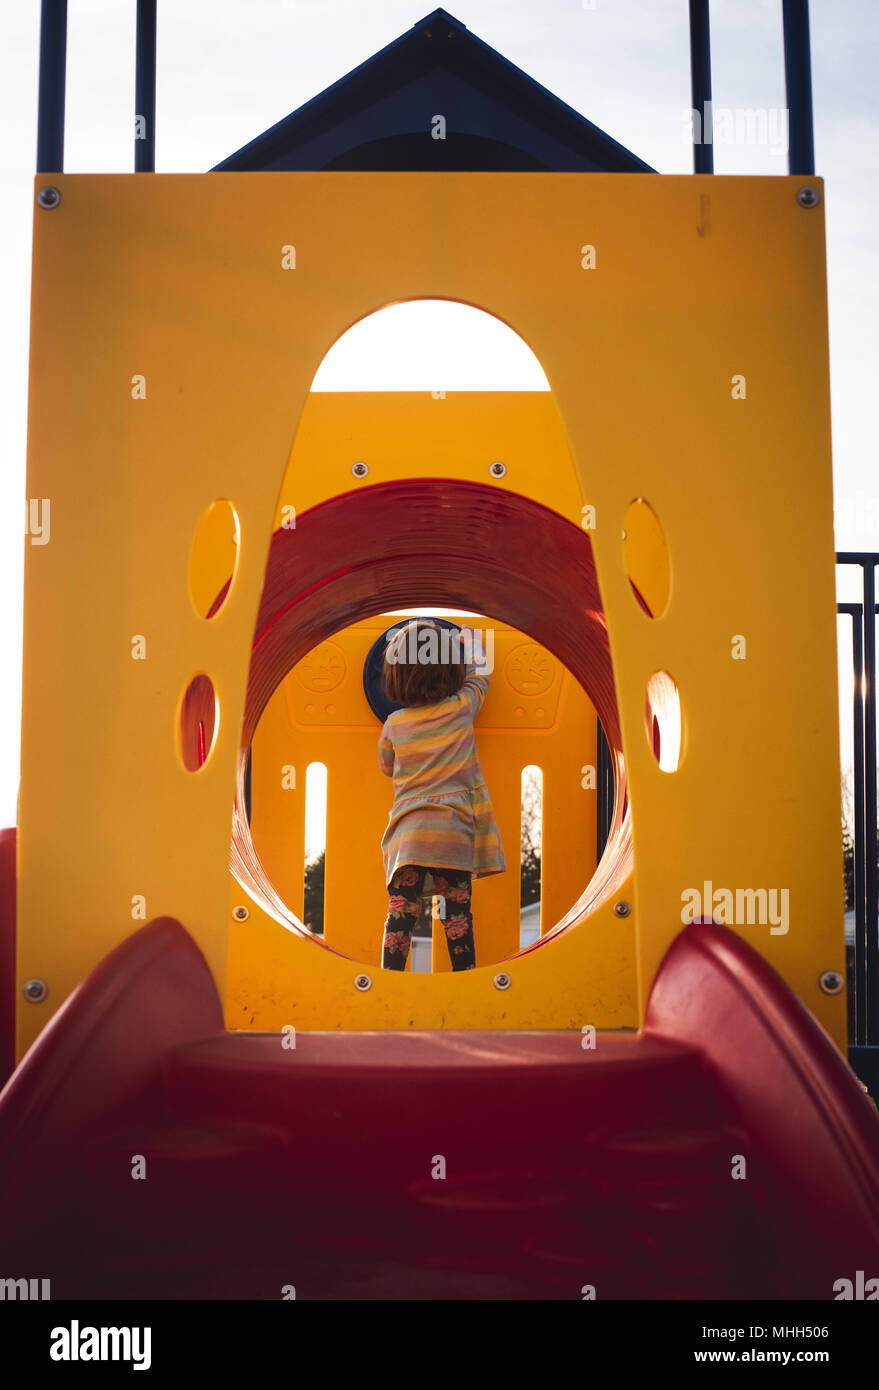 A faceless young girl plays at a playground on a sunny afternoon. Stock Photo